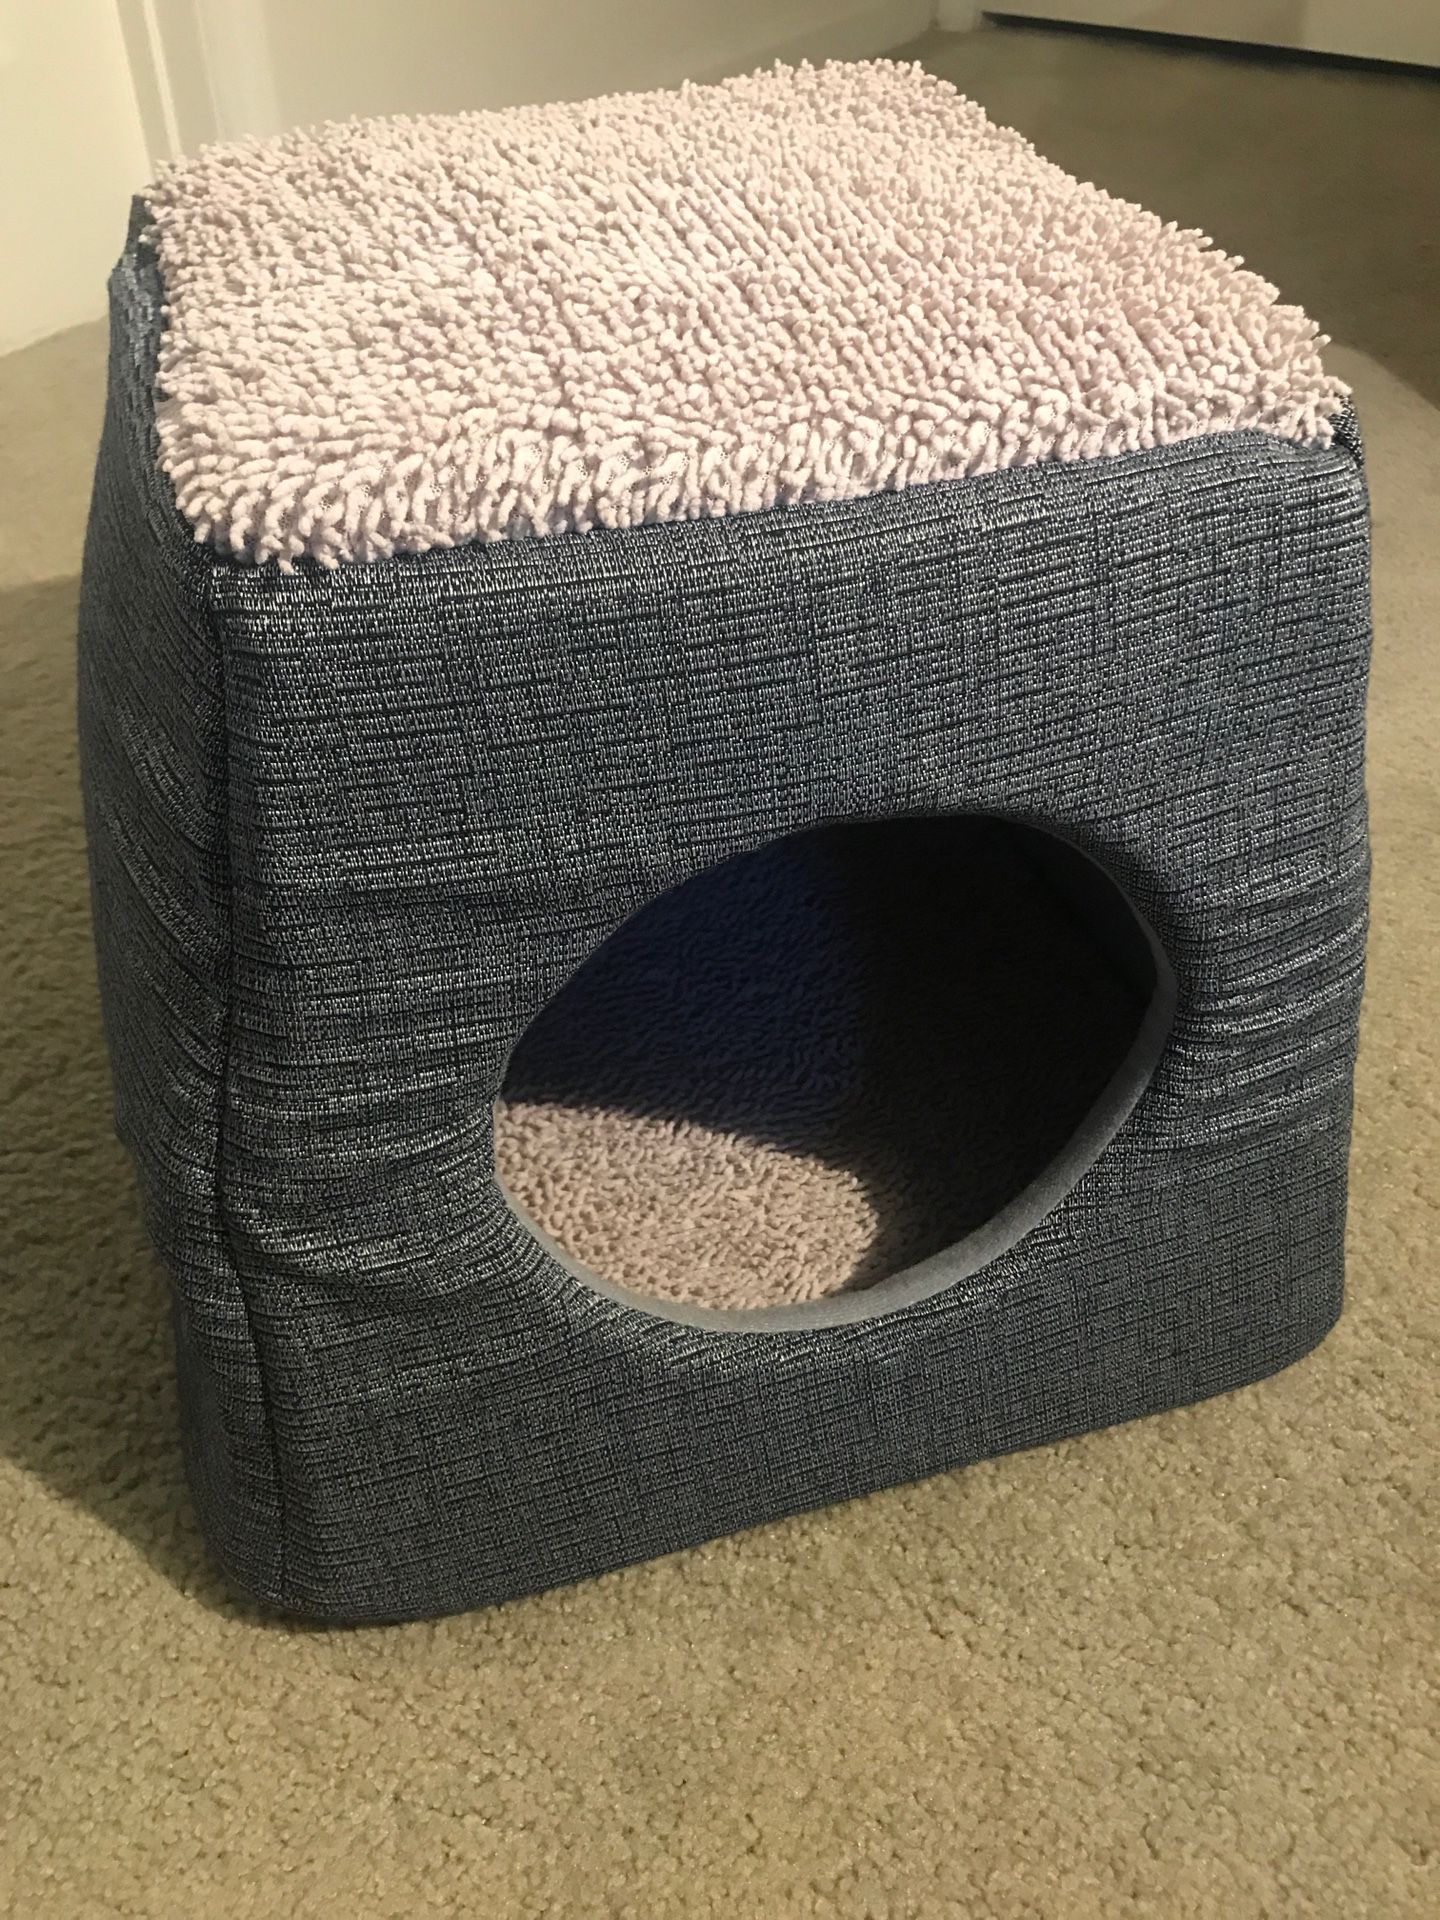 Dog/Cat house (NEVER USED)